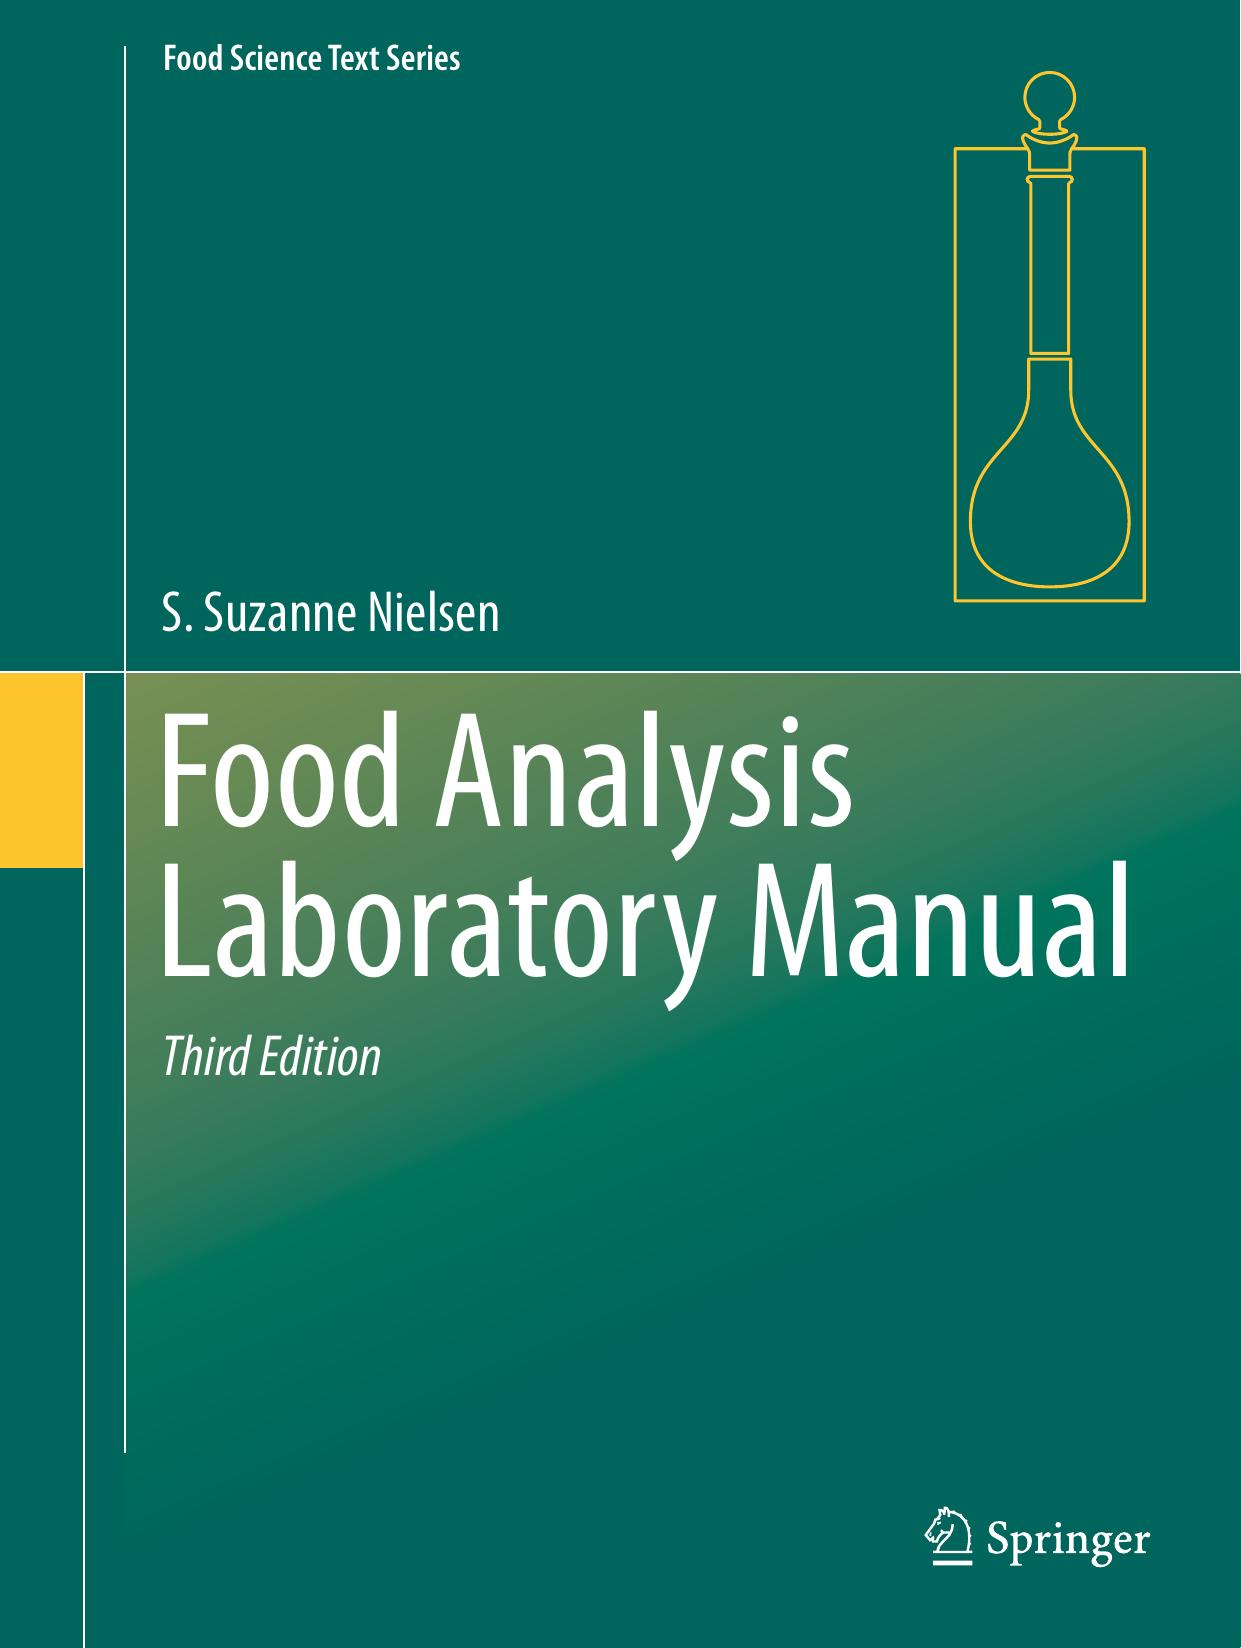 Food Analysis Laboratory Manual by S. Suzanne Nielsen